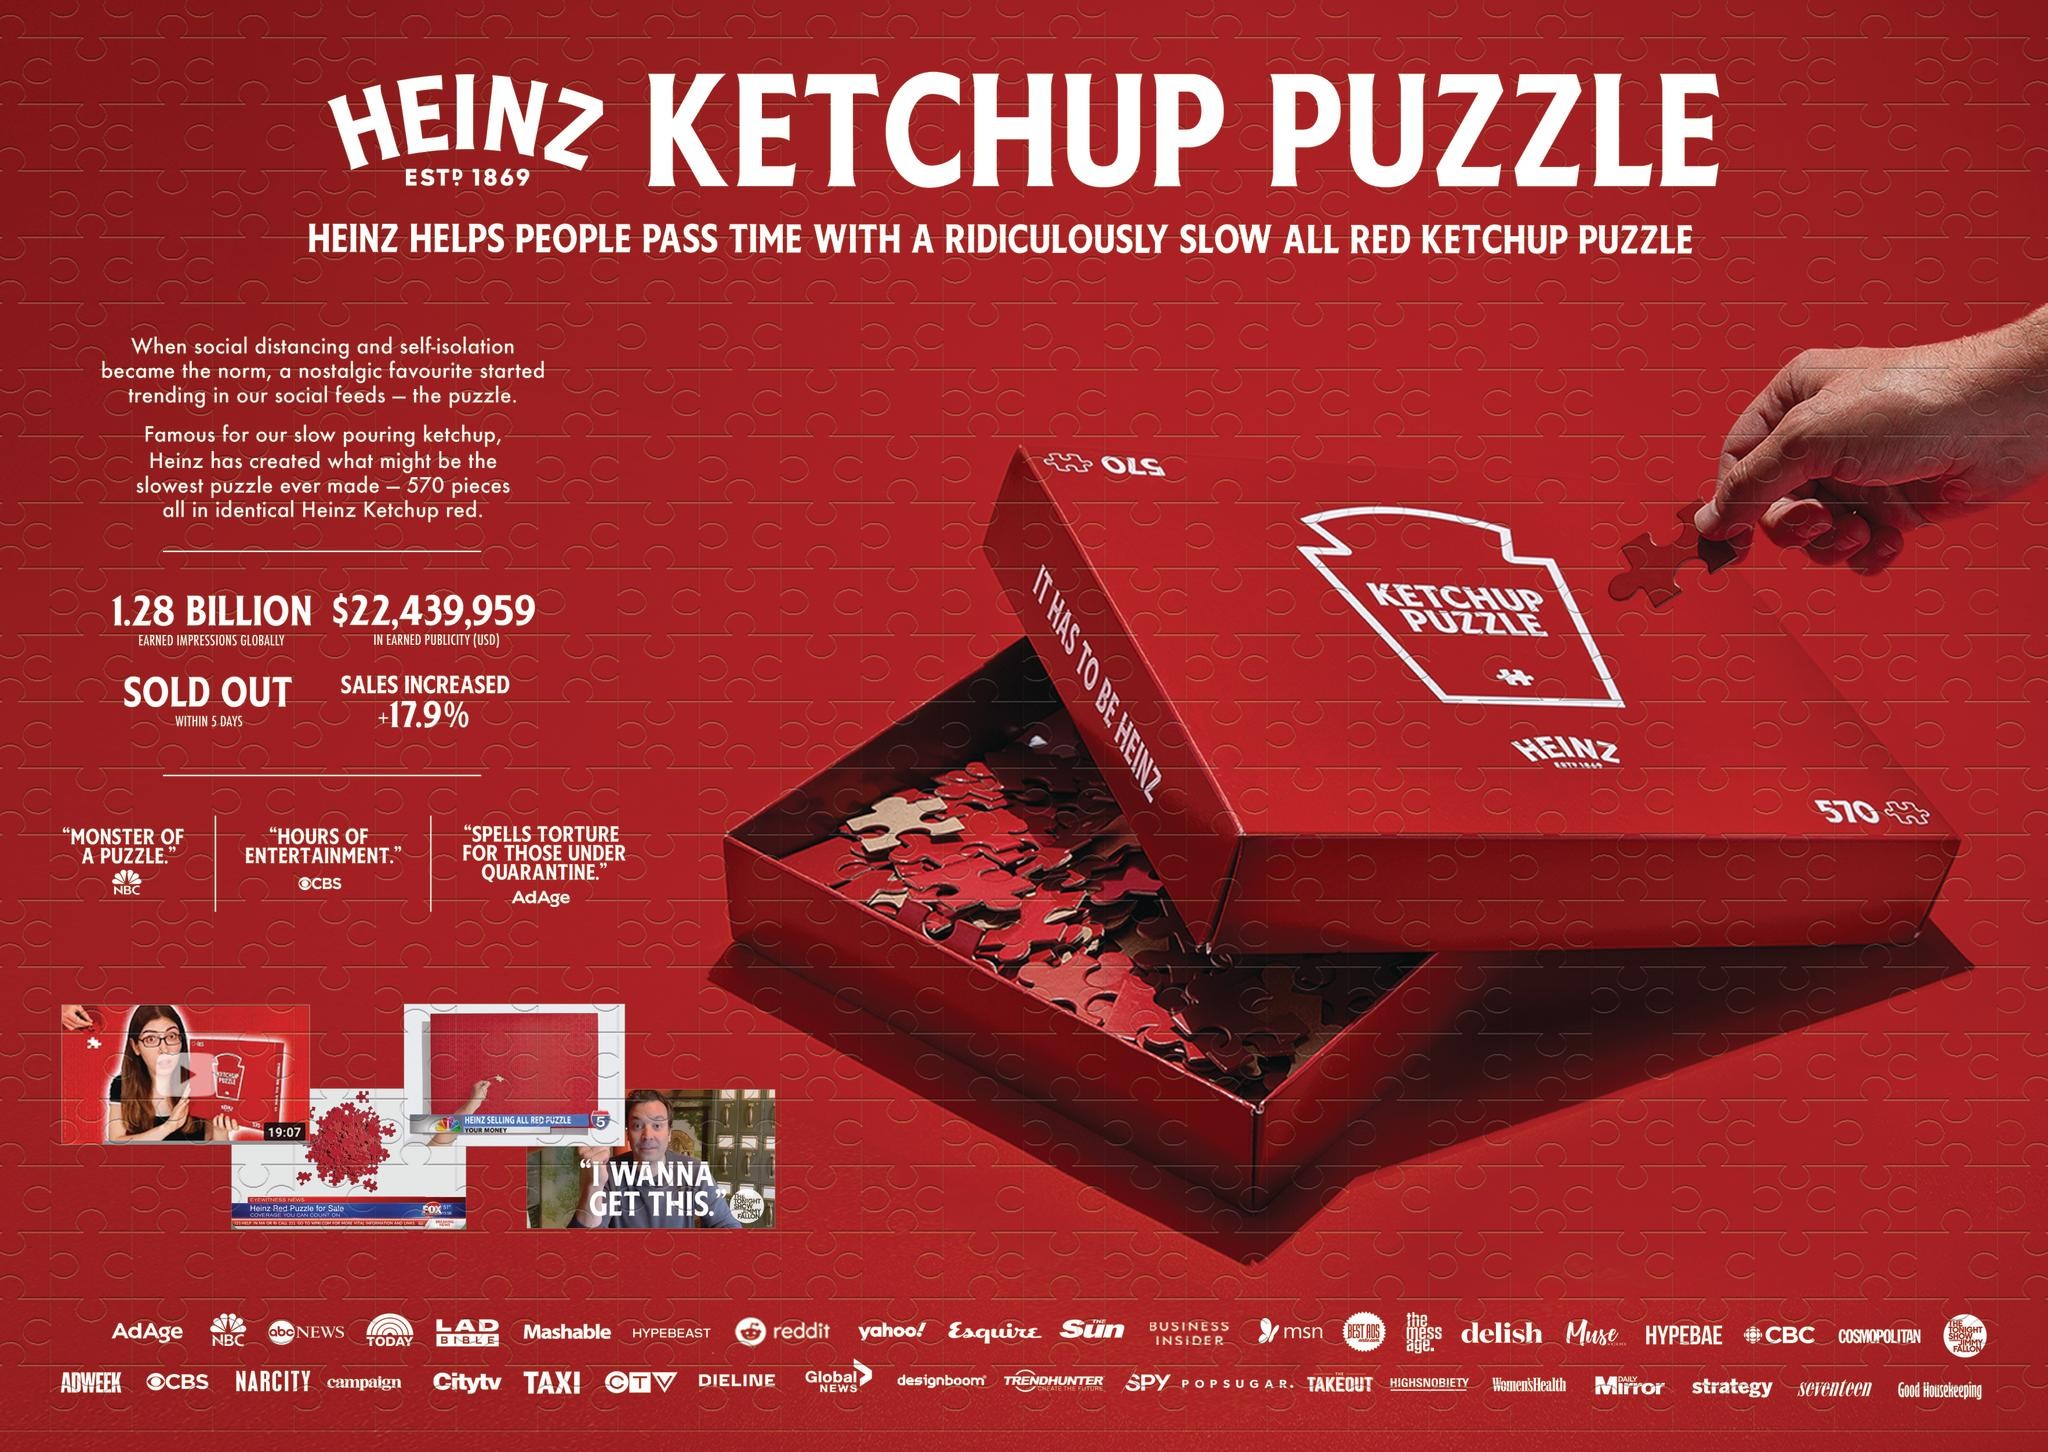 HEINZ KETCHUP PUZZLE